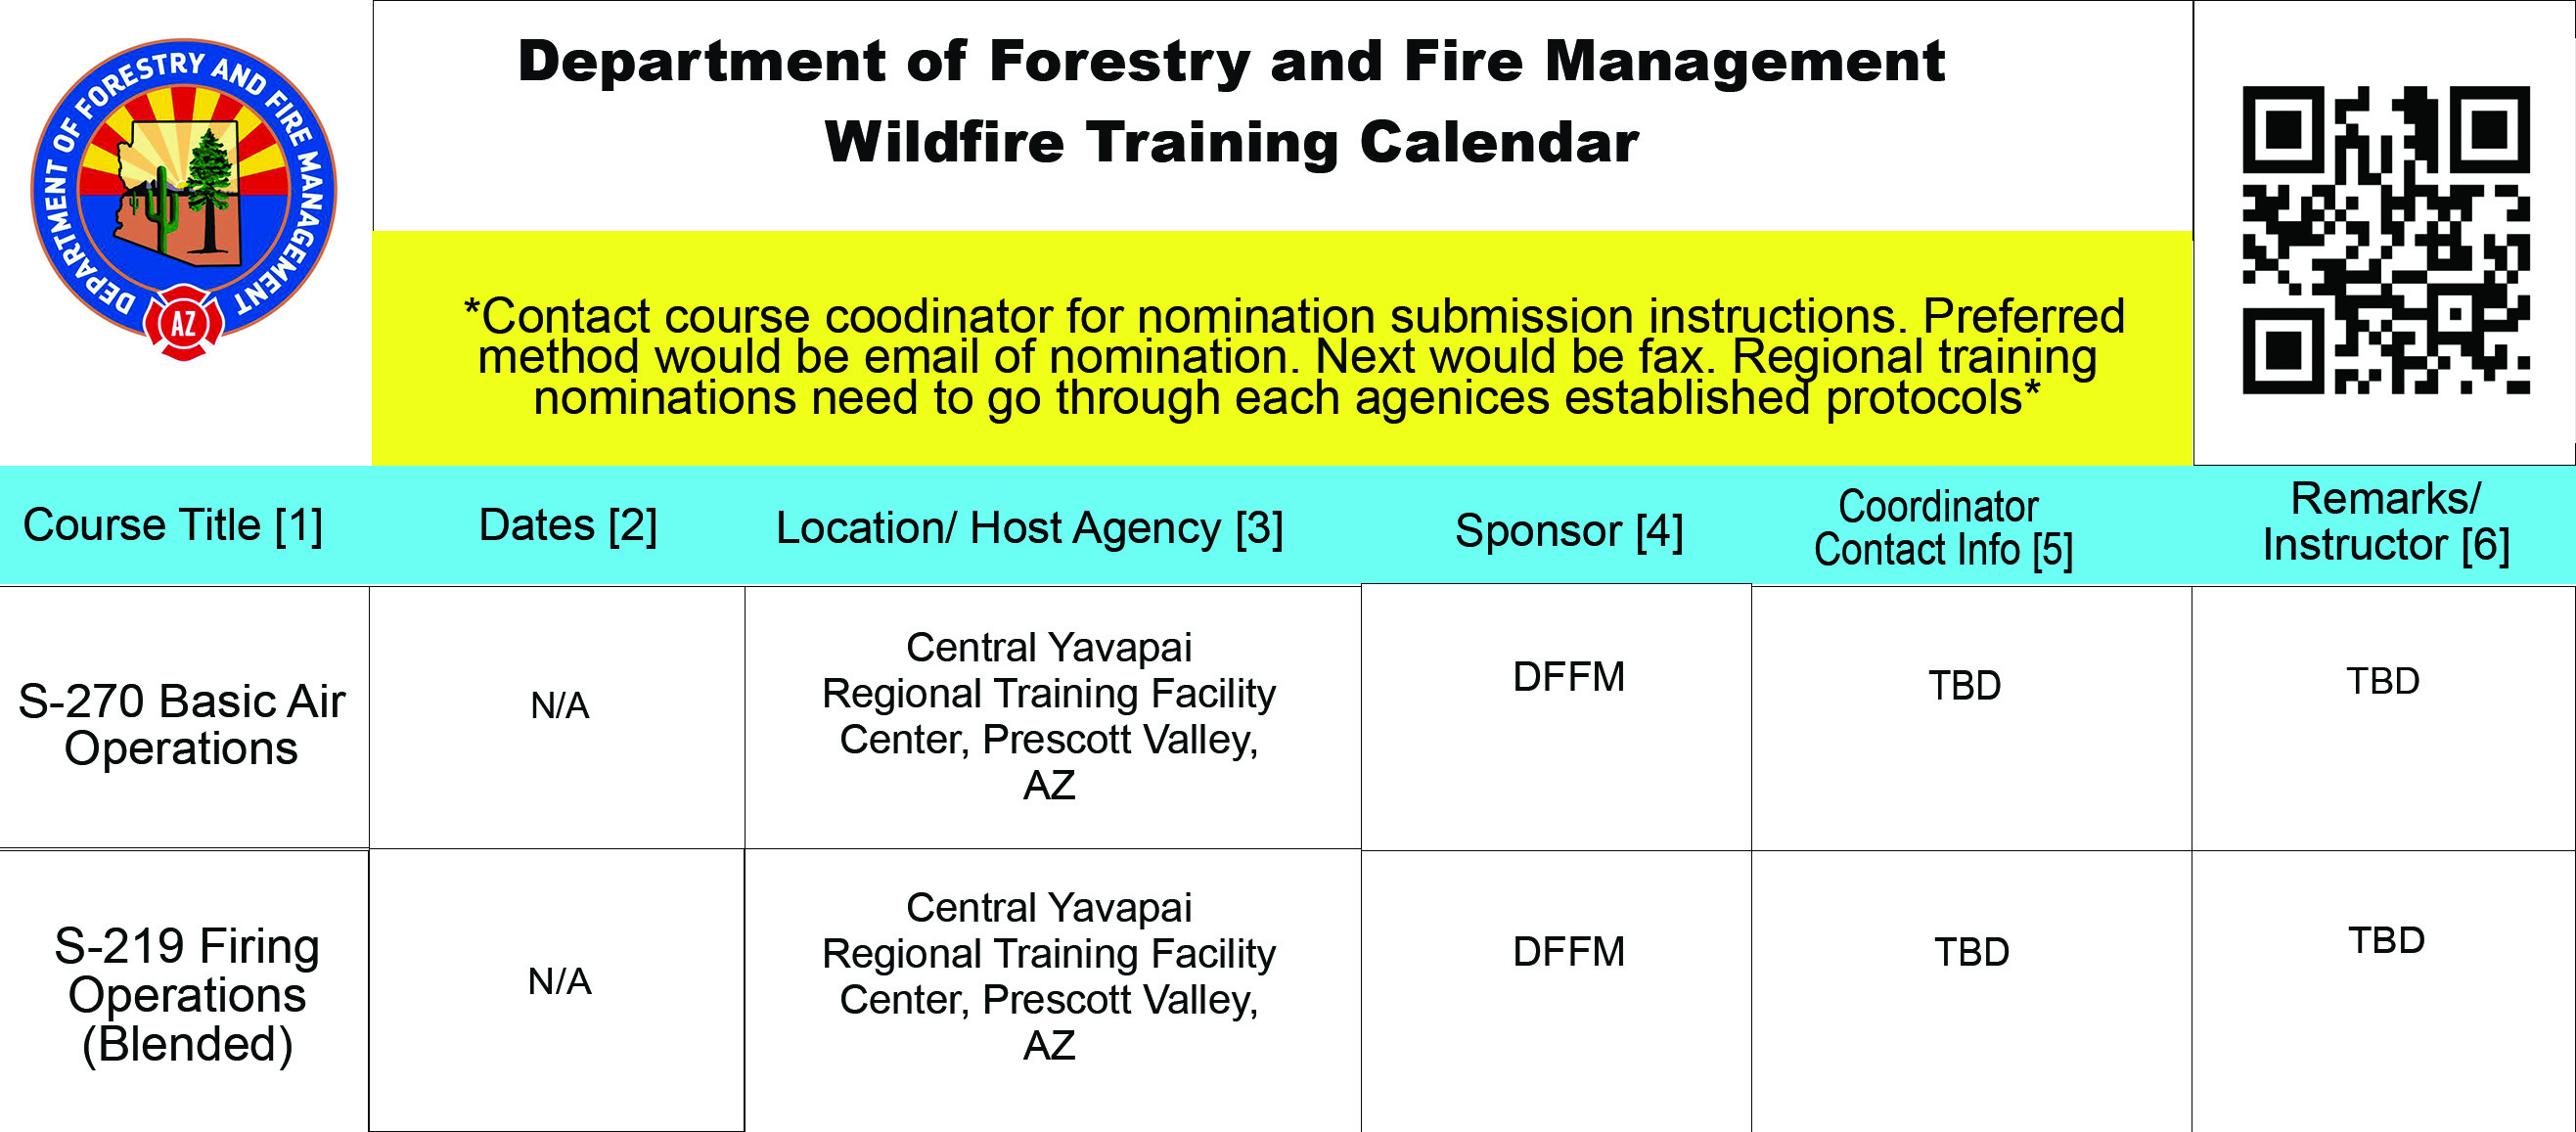 Training Department of Forestry and Fire Management